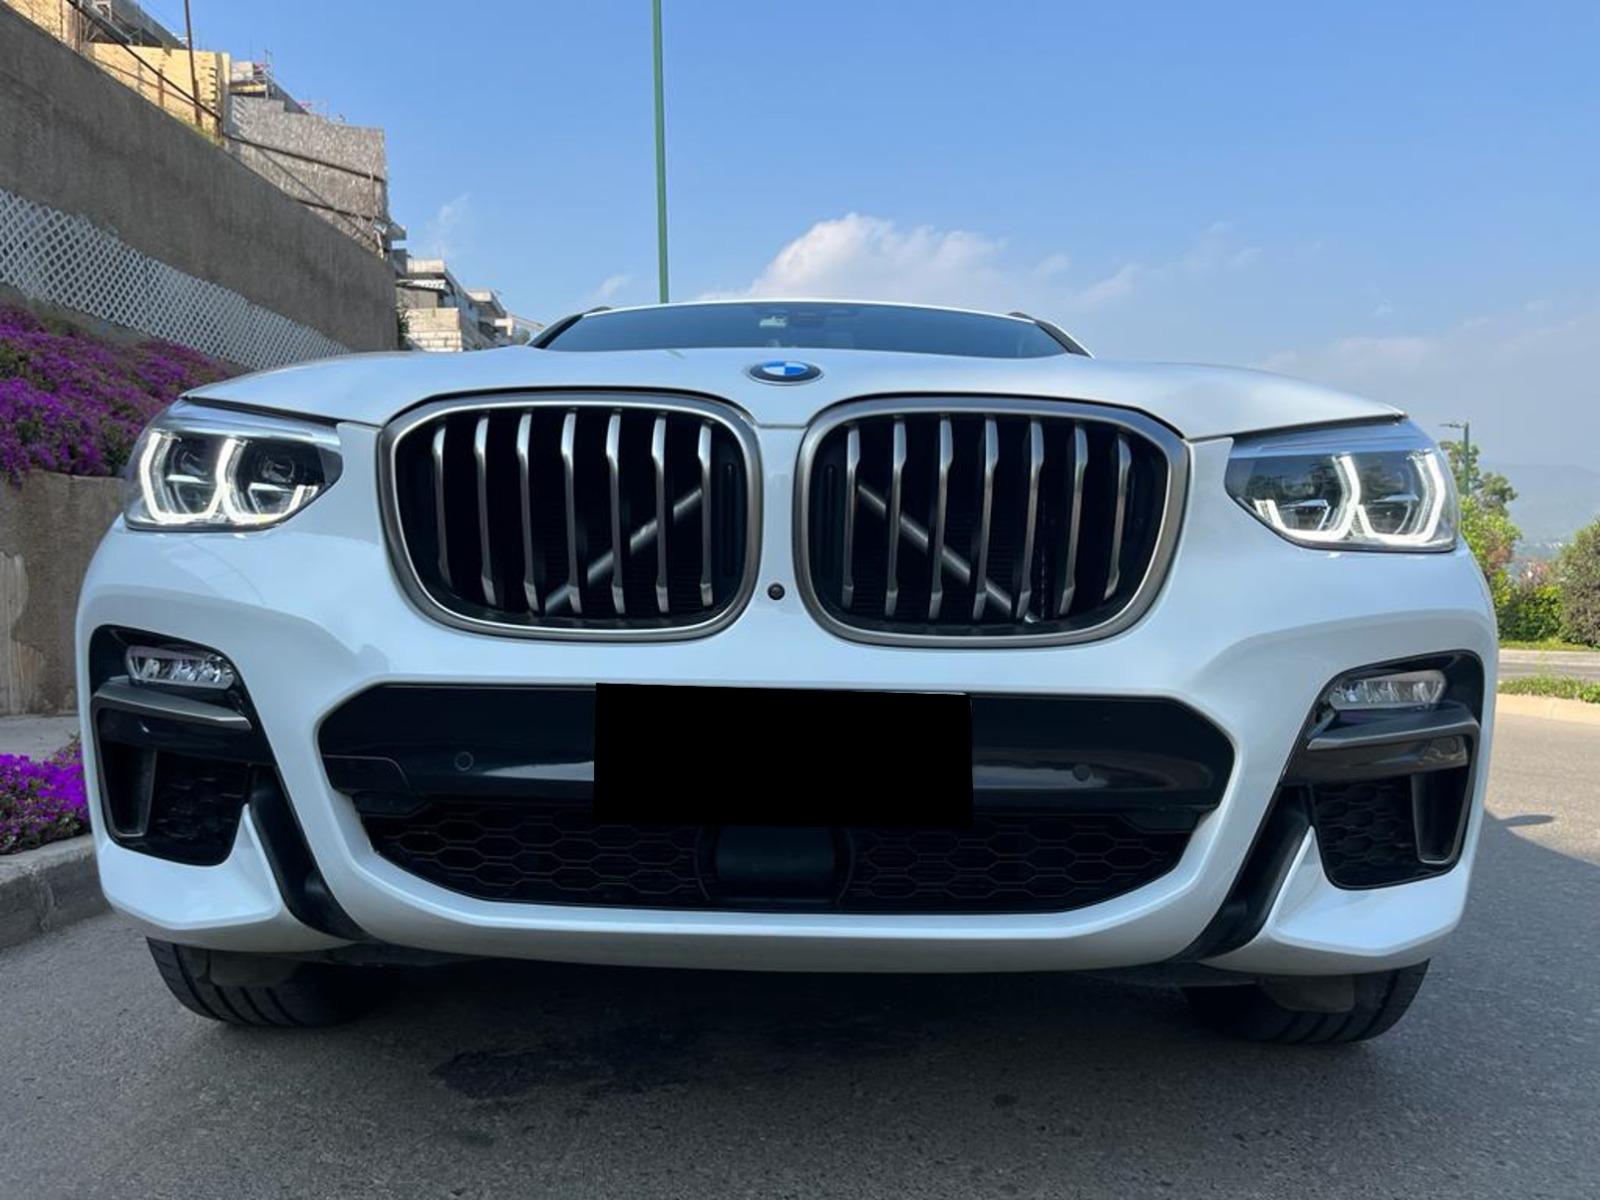 BMW X4 M40i 3.0 2020 SUV DEPORTIVA IMPECABLE - FULL MOTOR